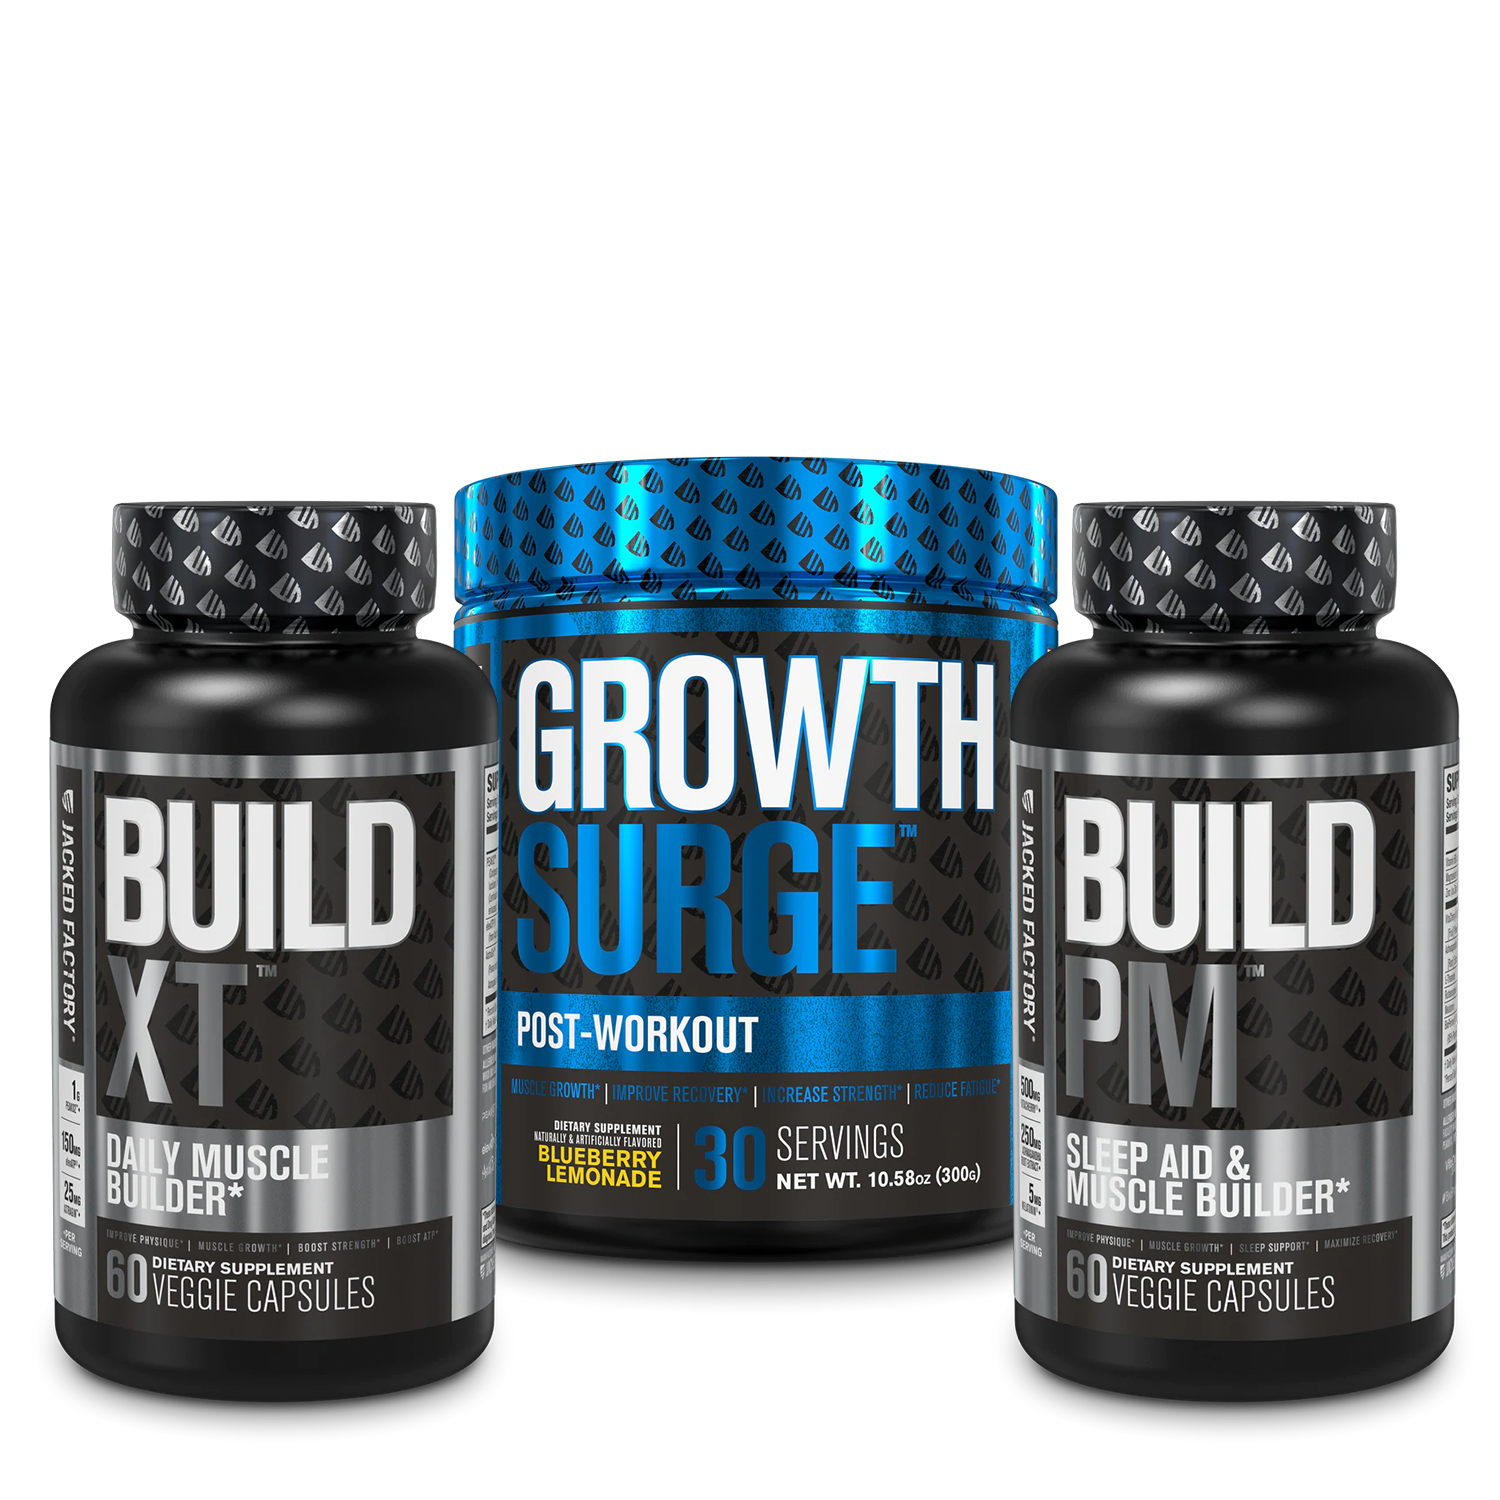 Jacked Factory's Build 24/7 stack including Build-XT (60 count), Growth Surge (30 servings), & Build-PM (60 count)